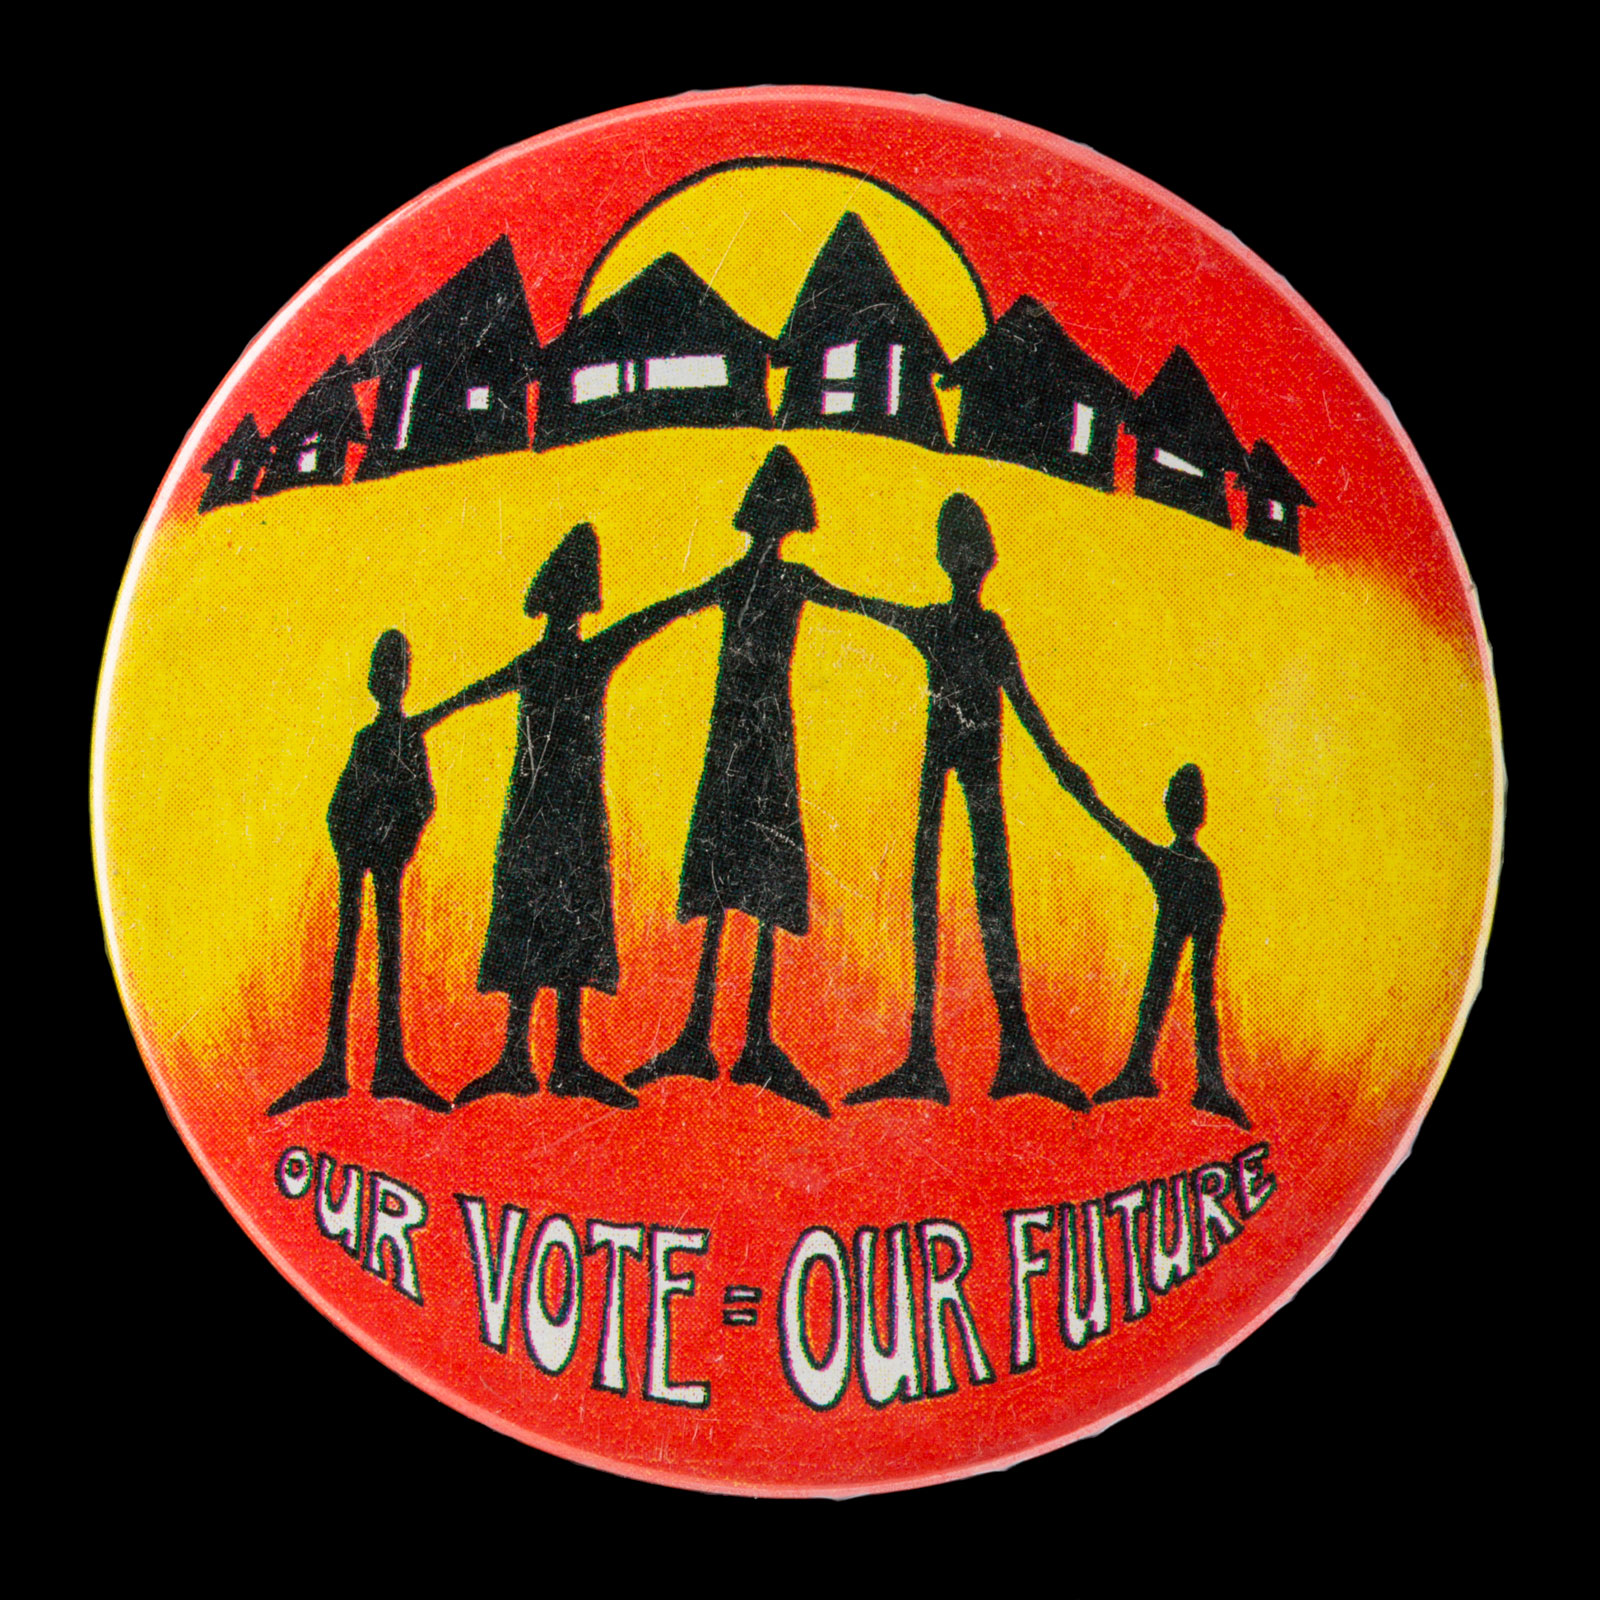 ‘Our vote = our future’ metal badge
